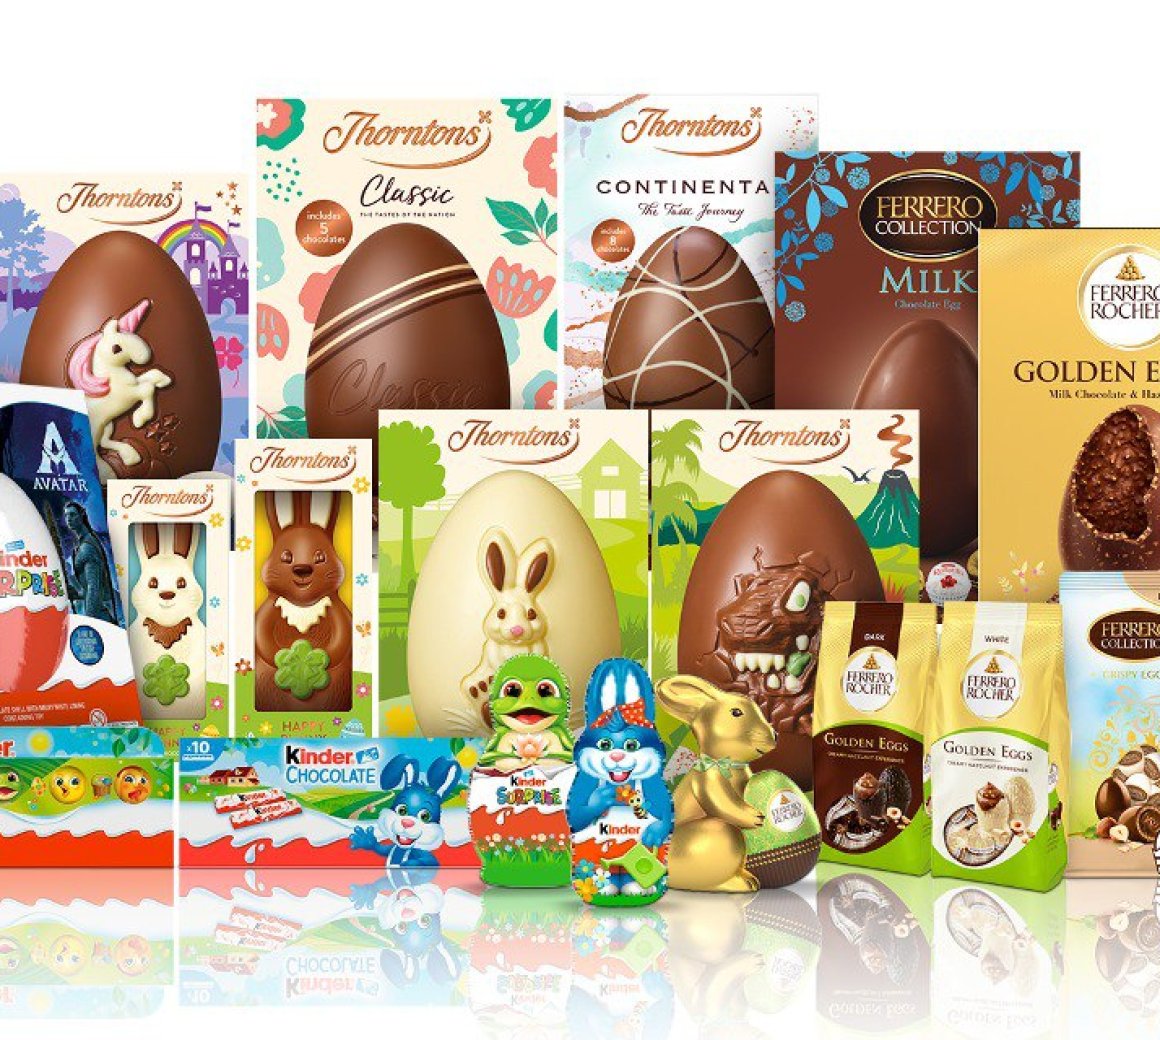 Shoppers to spend more on confectionery gifting this spring, exclusive research from Ferrero finds.